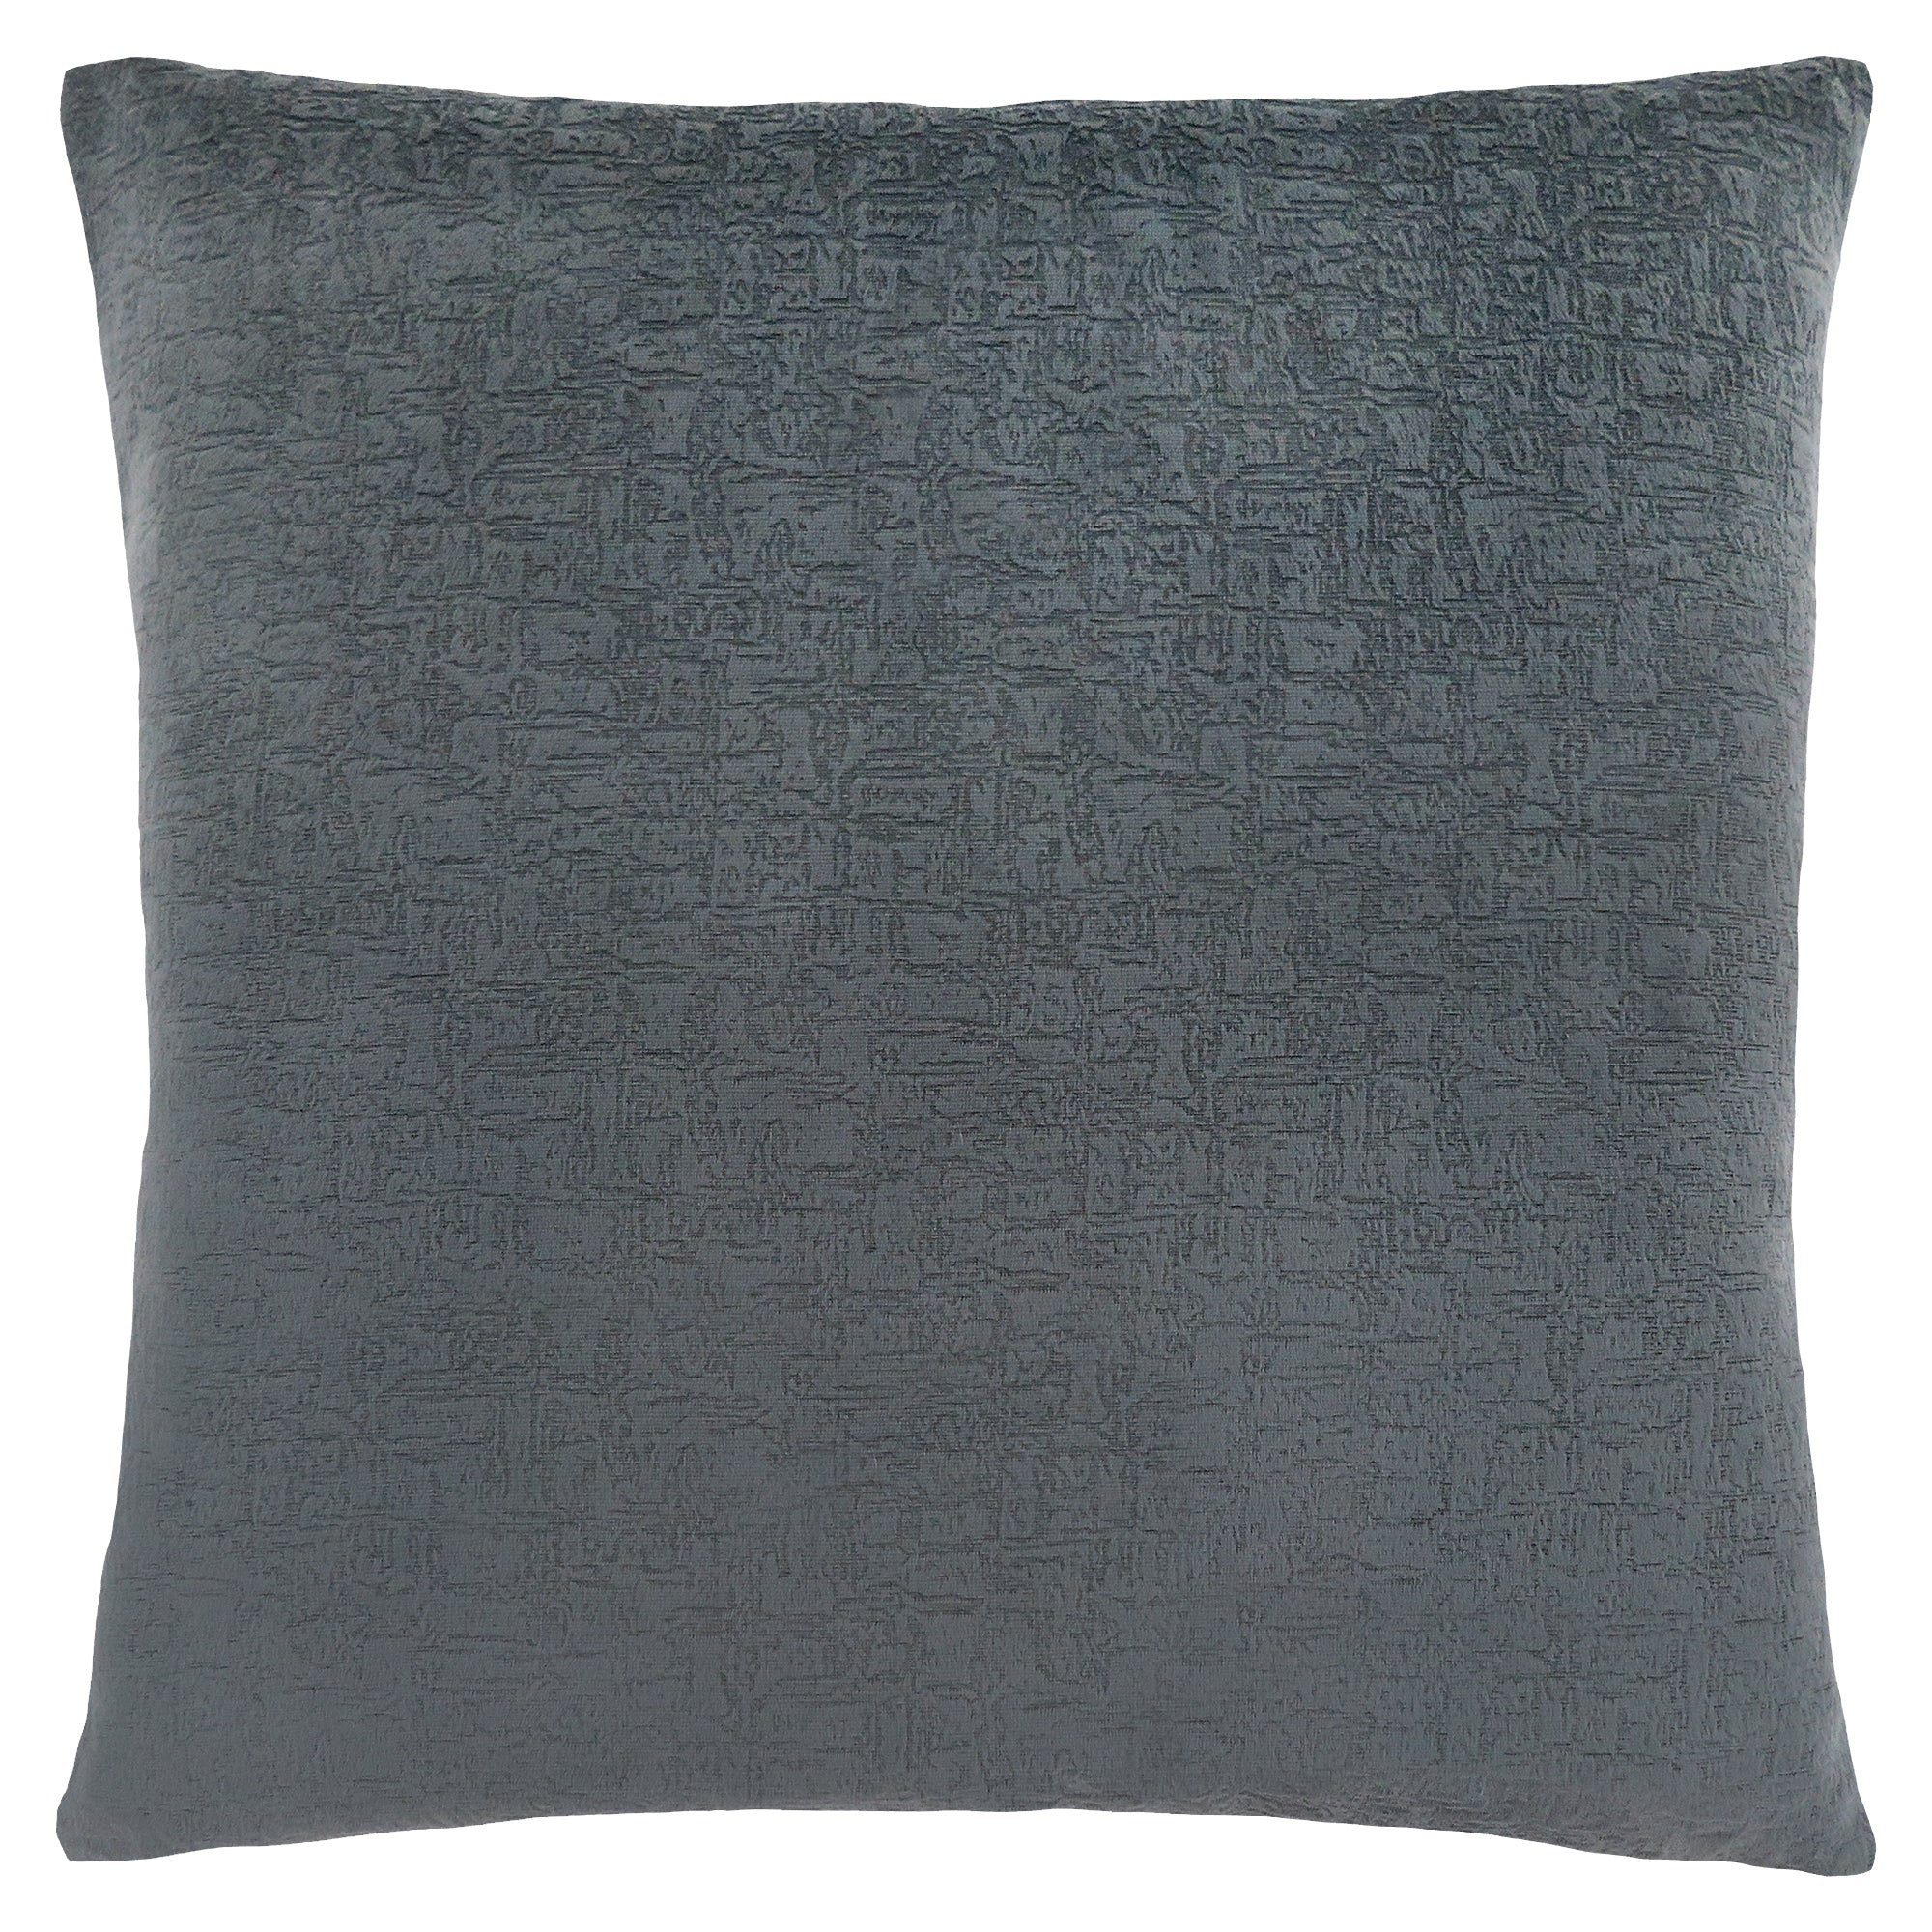 MN-729274    Pillows, 18 X 18 Square, Insert Included, Decorative Throw, Accent, Sofa, Couch, Bed, Plush Velvet Finish, Soft Polyester Fabric, Hypoallergenic Soft Polyester Insert, Dark Grey, Contemporary, Modern